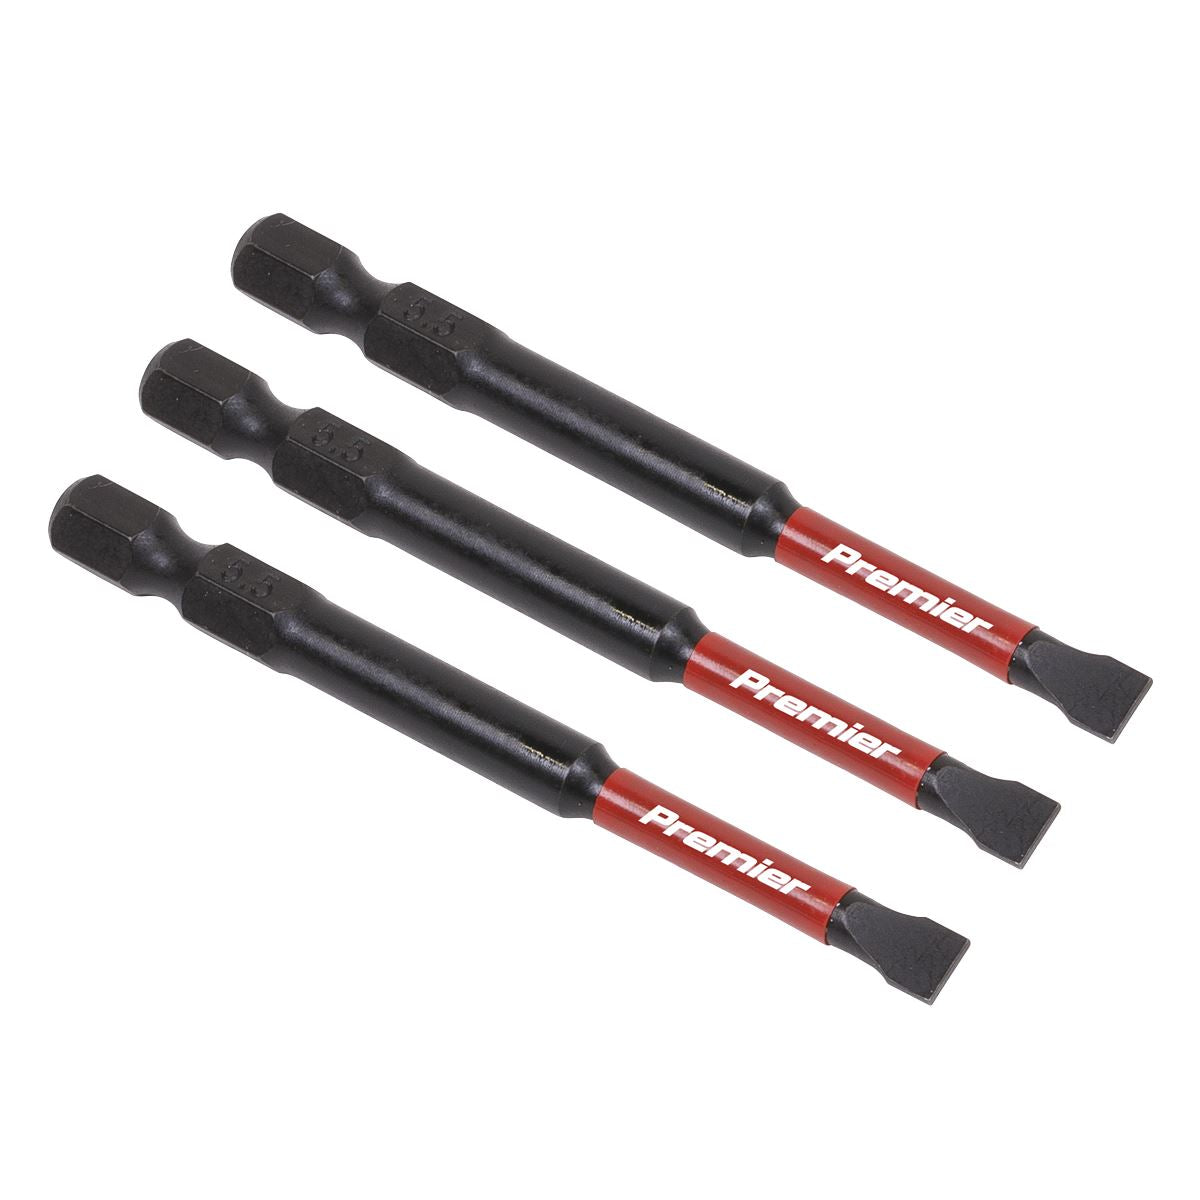 Sealey Premier Slotted 5.5mm Impact Power Tool Bits 75mm - 3pc